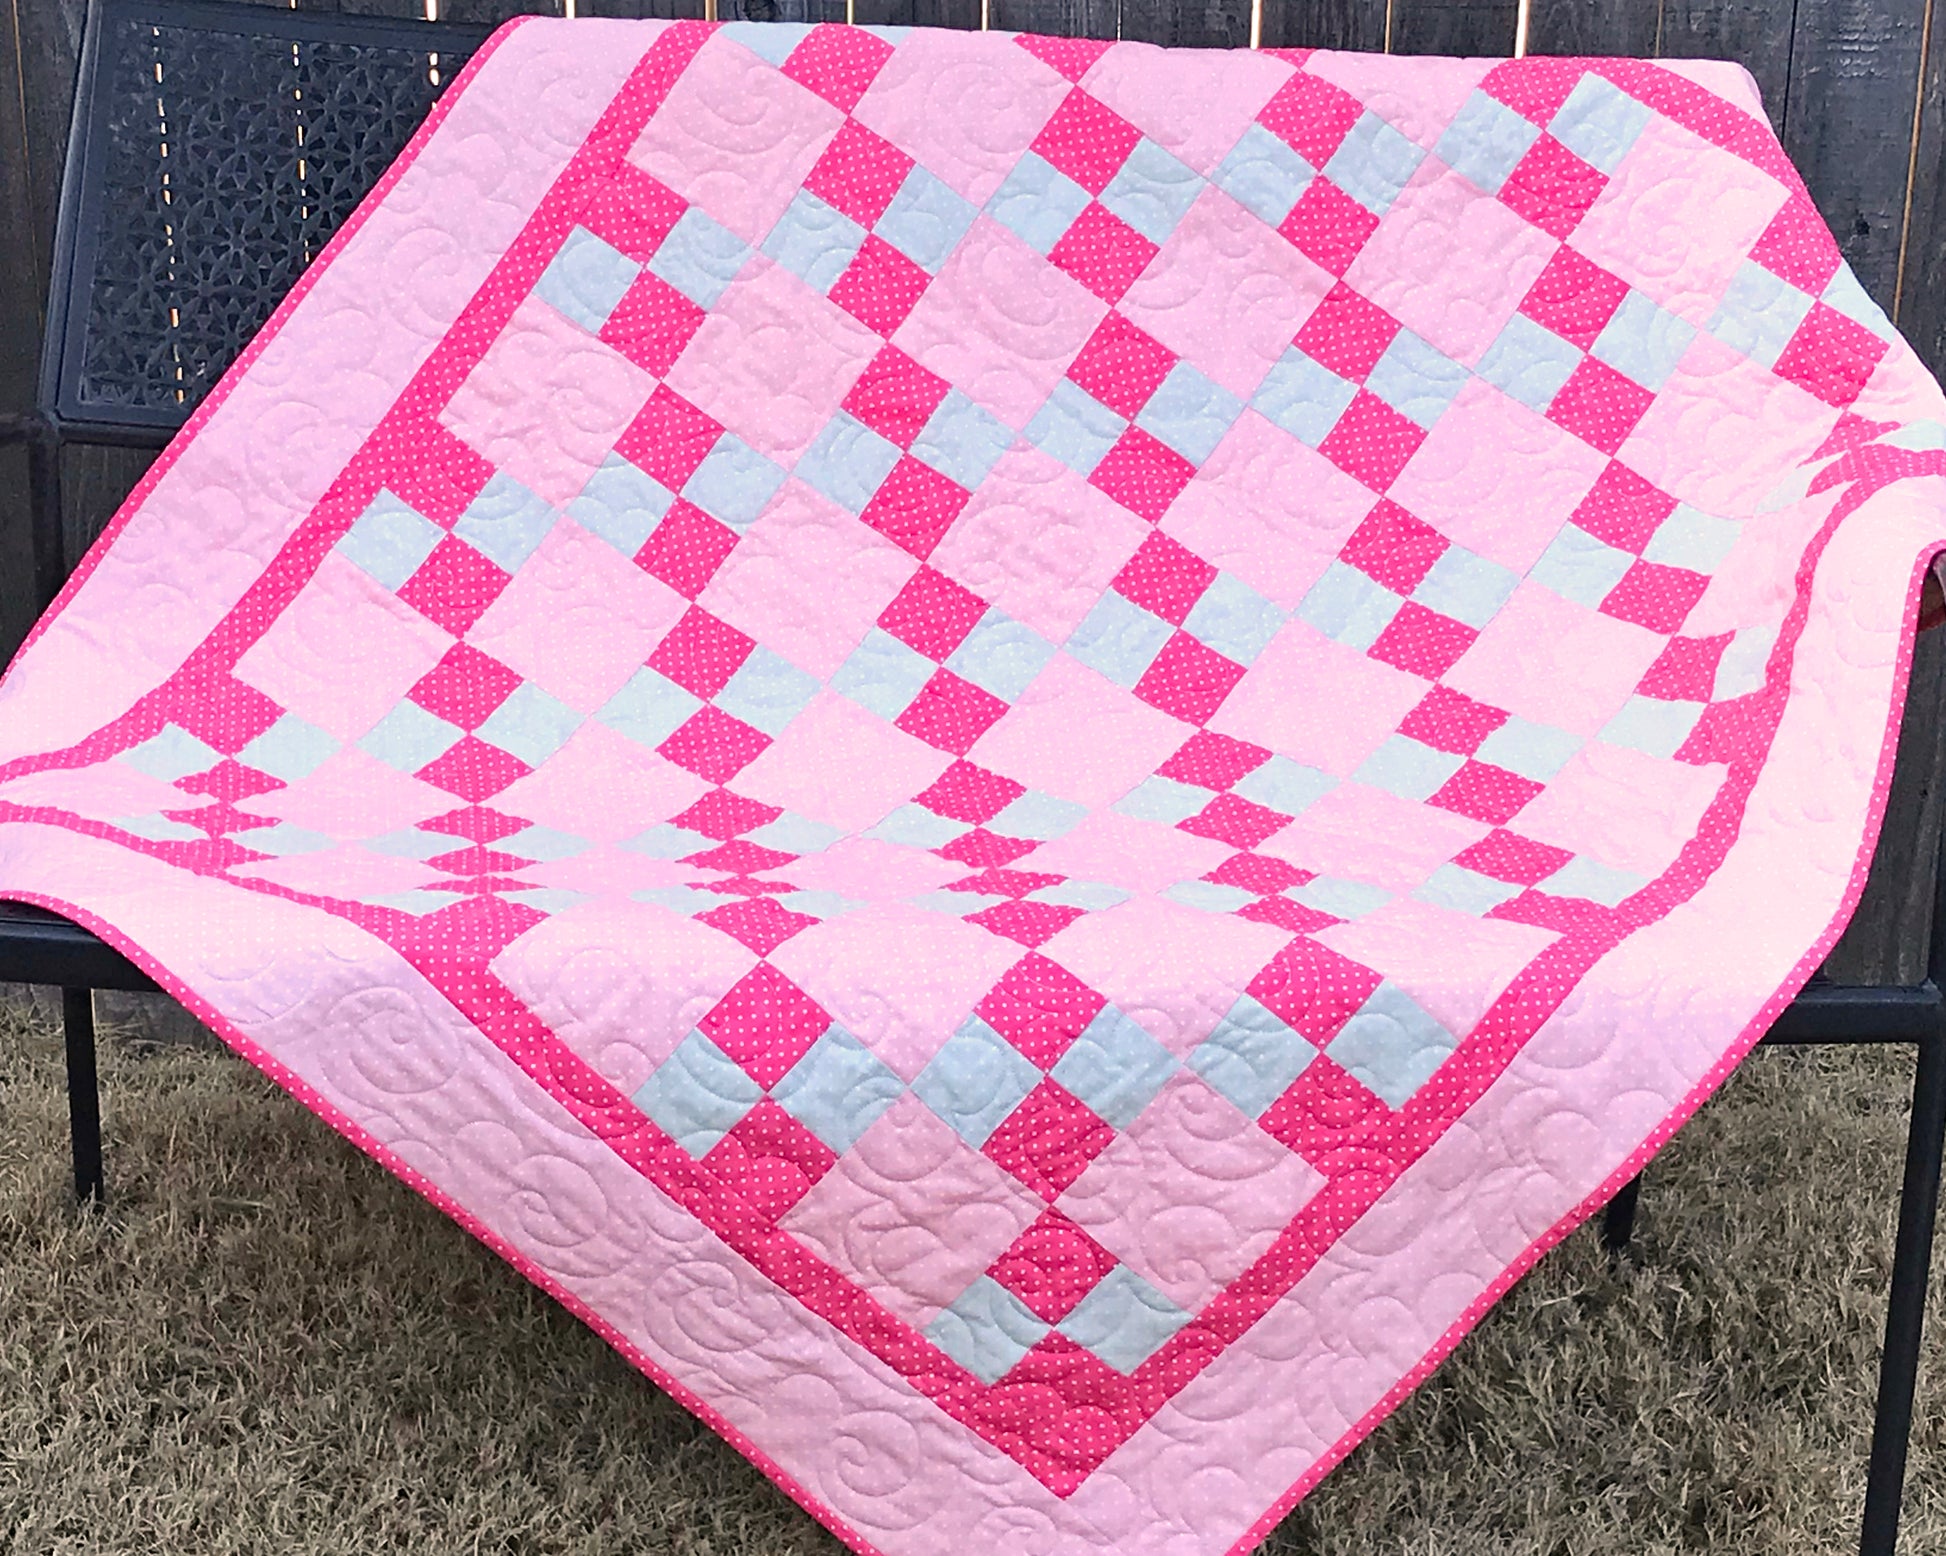 Pink and Gray Double Four Patch Baby or Toddler Quilt - Handmade Quilts, Digital Patterns, and Home Décor items online - Cuddle Cat Quiltworks